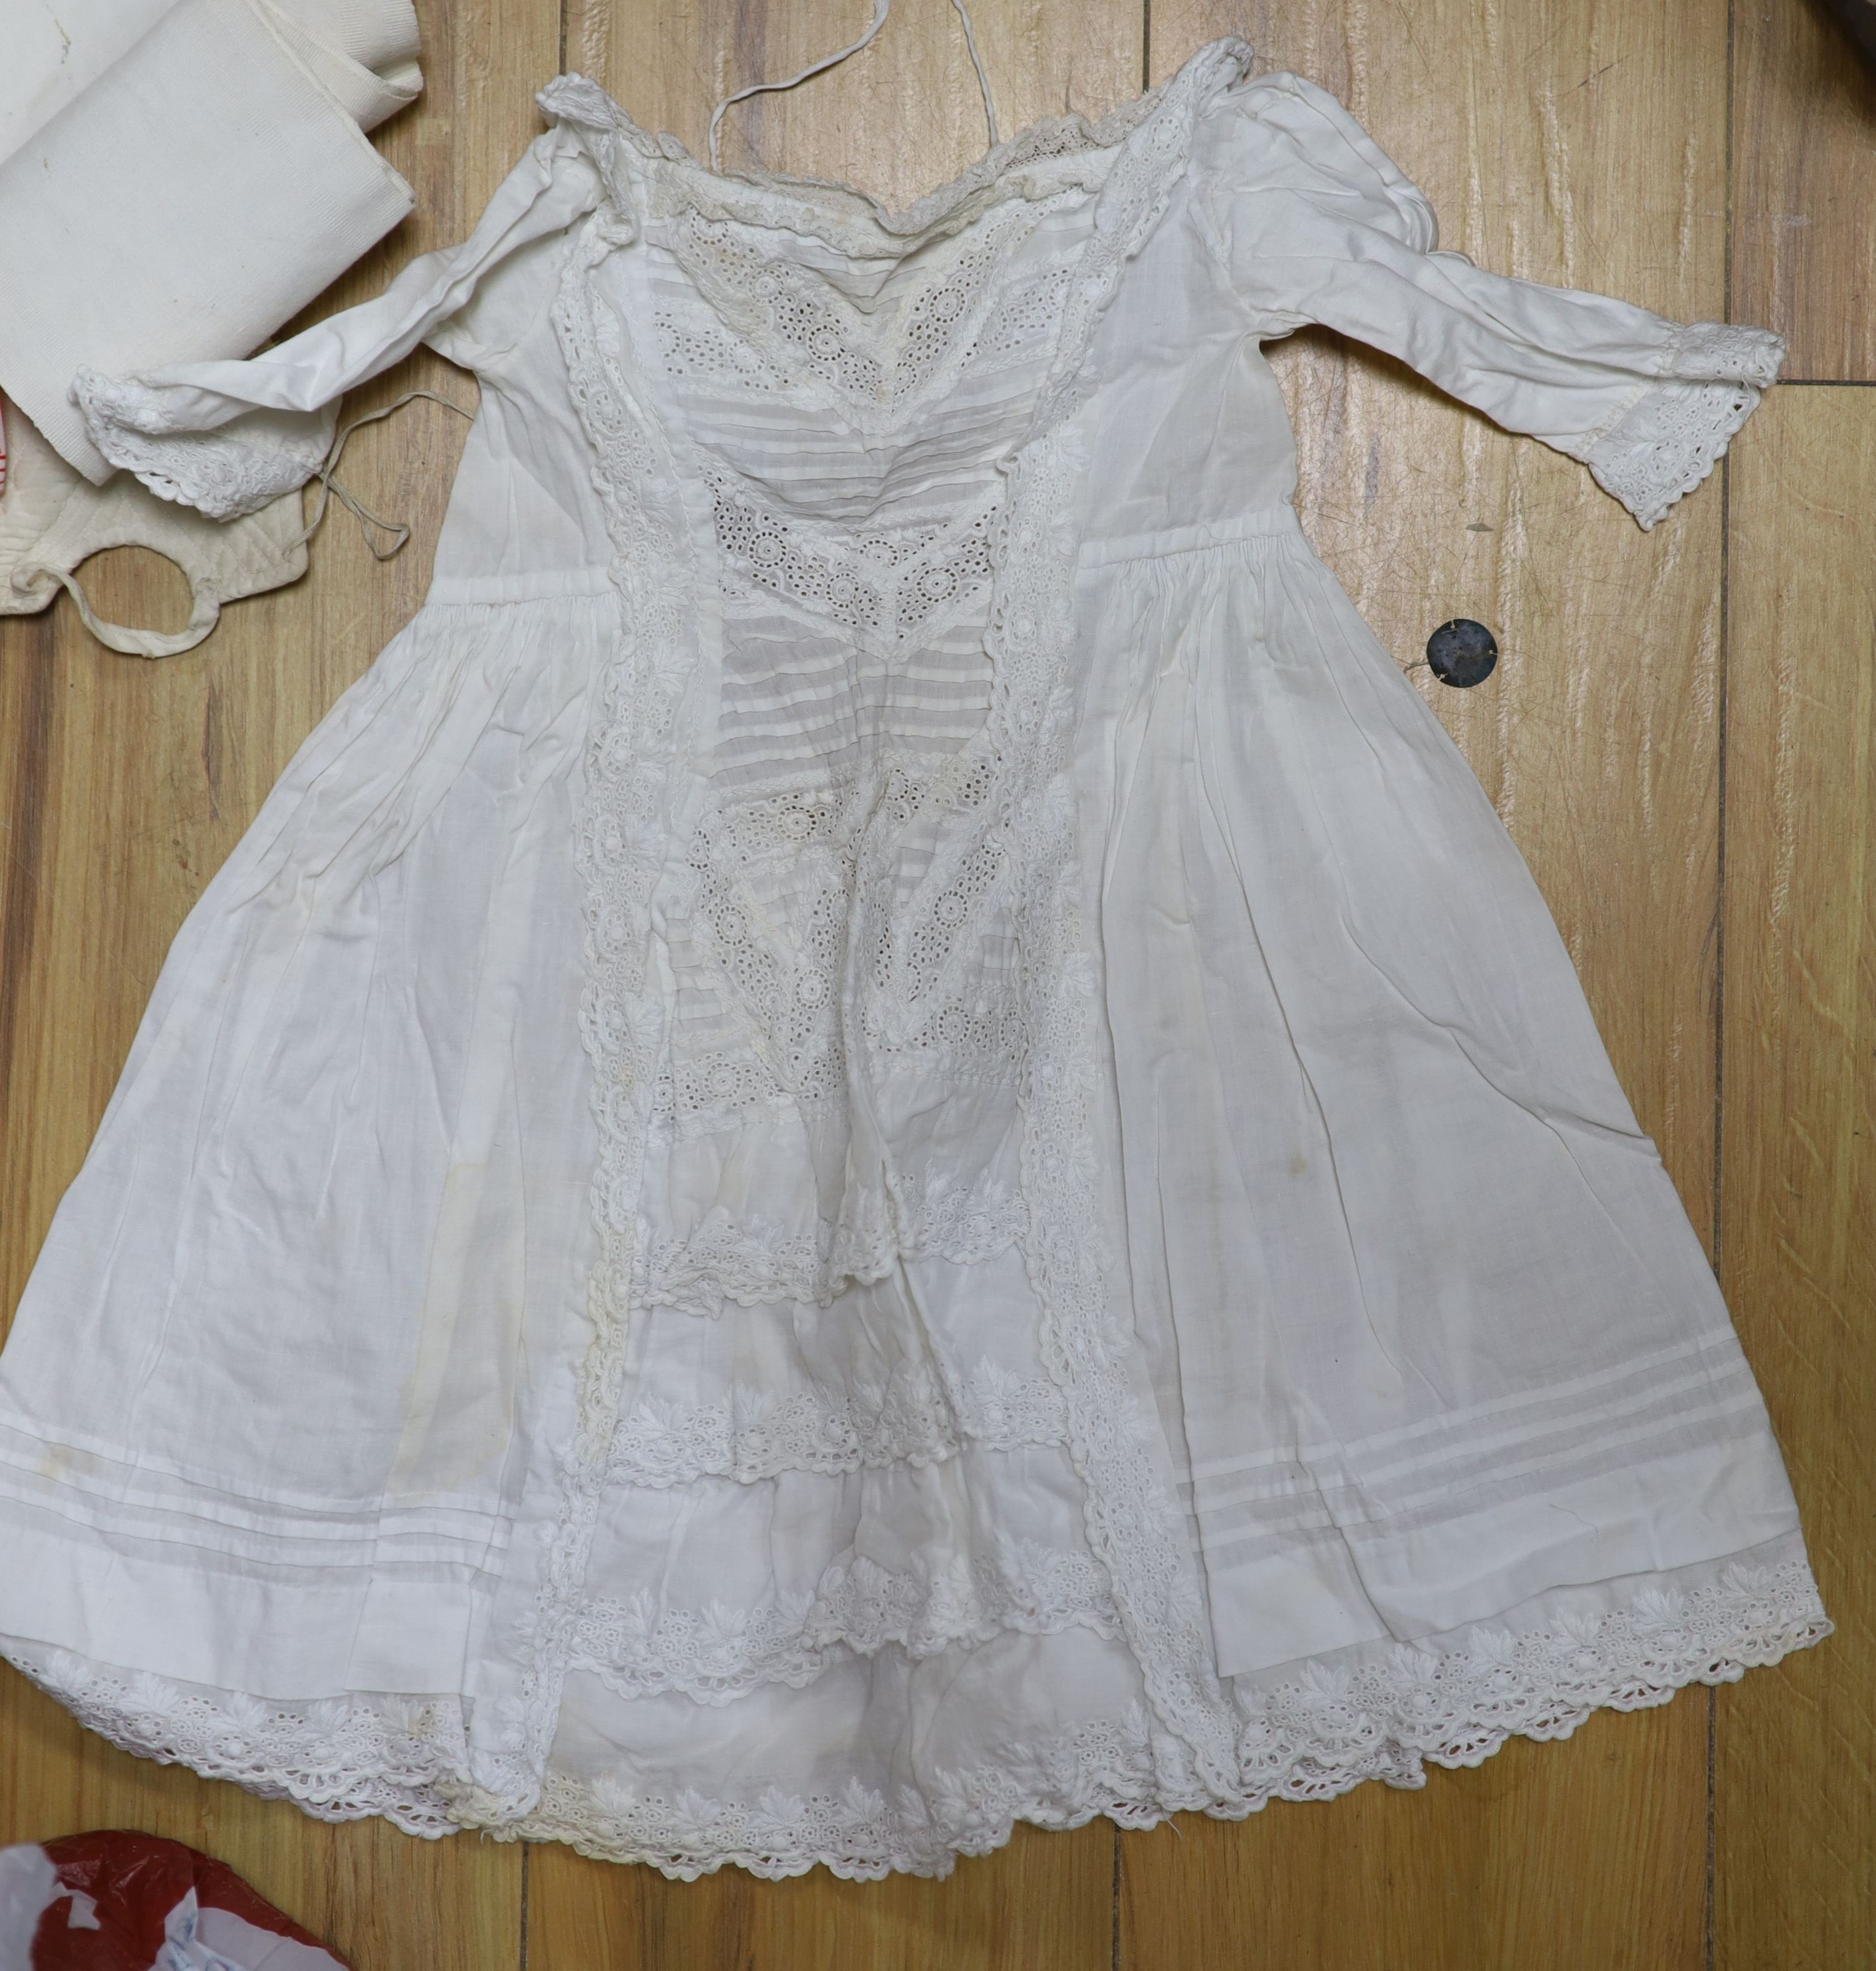 A collection of christening gowns and baby dresses